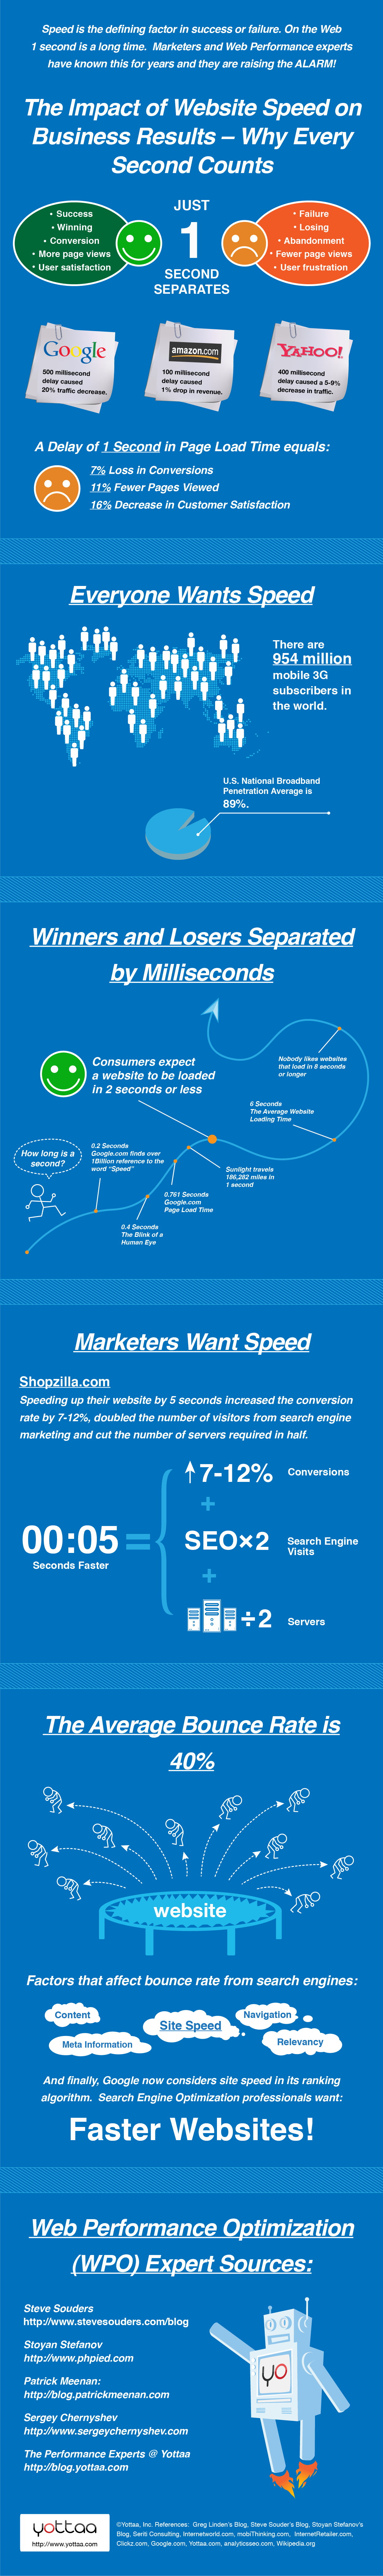 The Impact Of Site Speed On Business Results [Infographic]